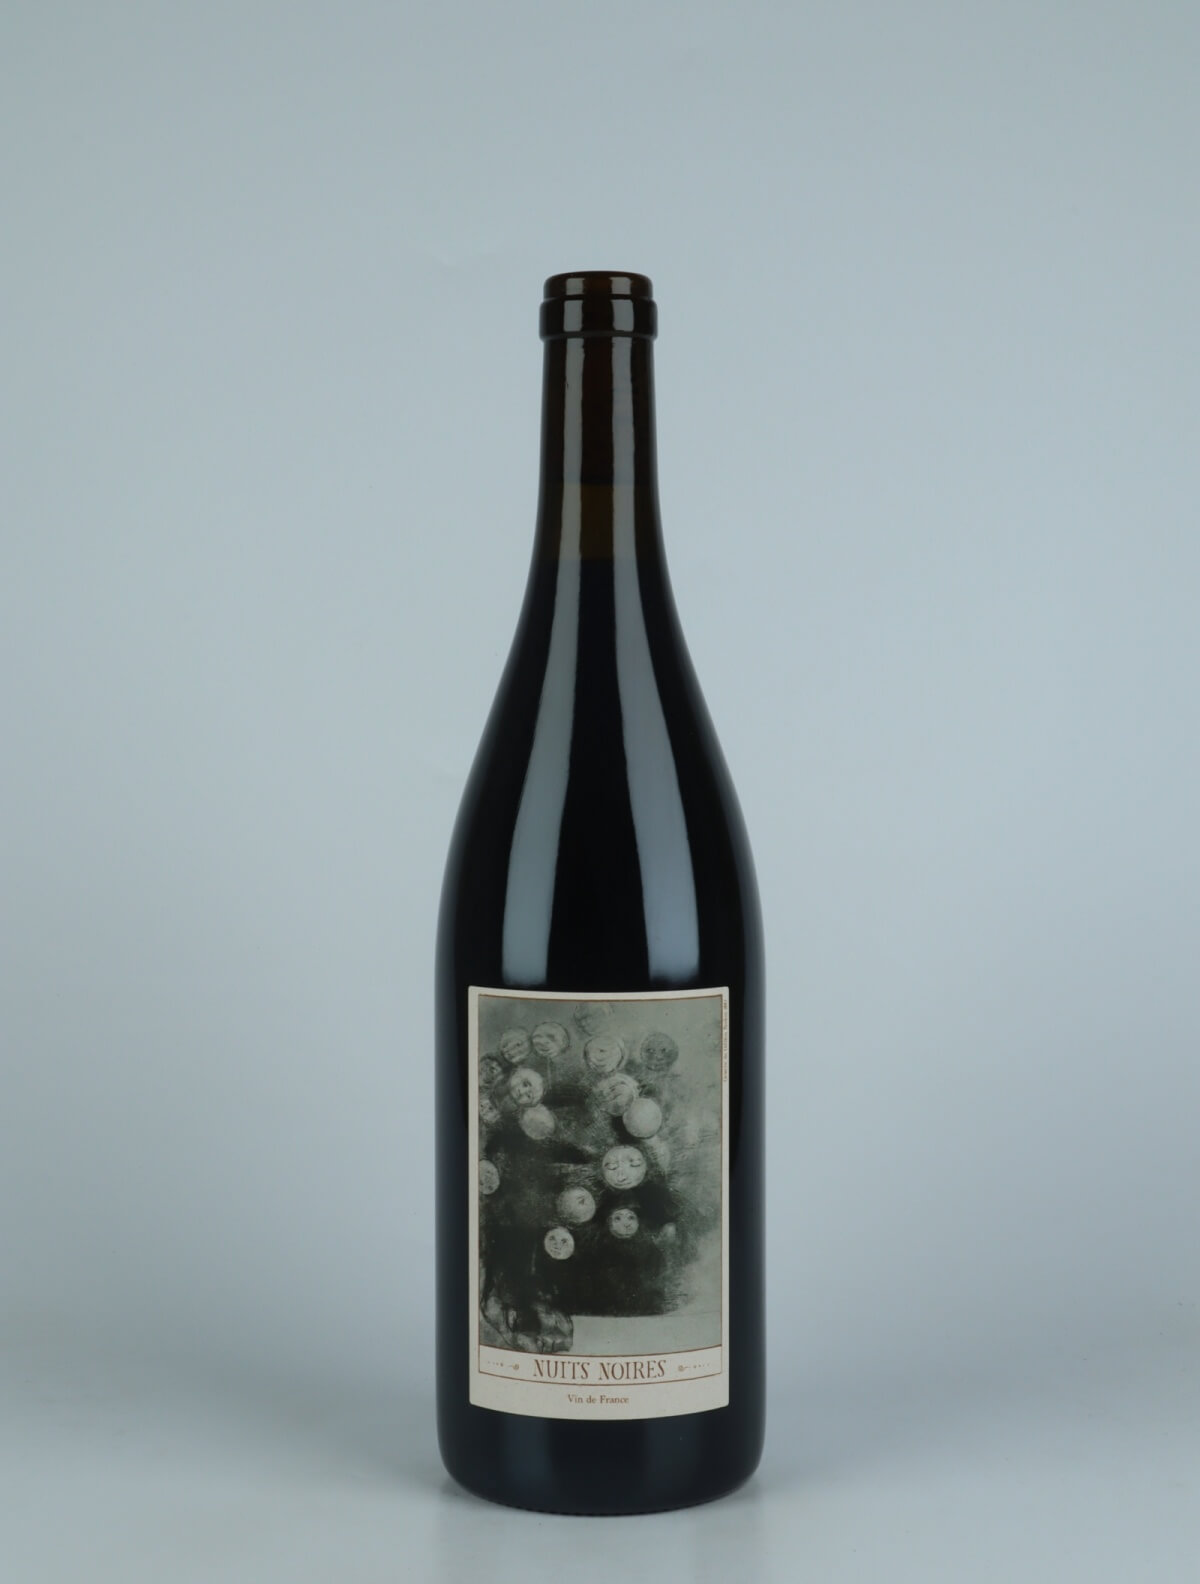 A bottle 2022 Nuits Noires Red wine from Clos Bateau, Beaujolais in France